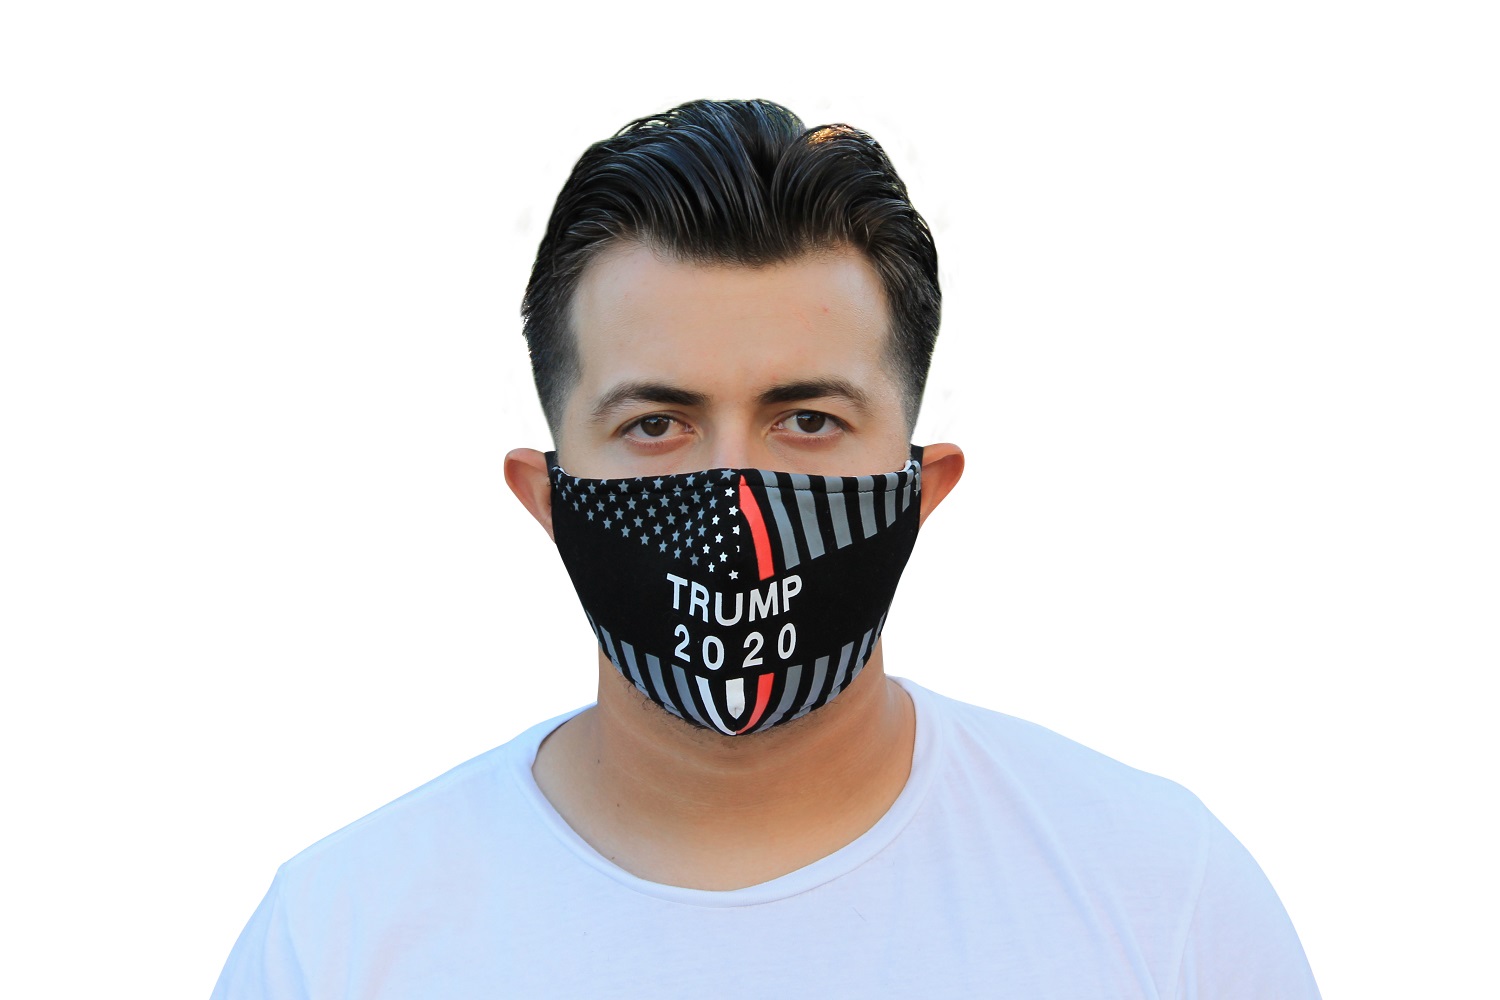 Trump 2020 Reusable and Washable Unisex Fashion Cloth Face Mask with Adjustable Straps - image 1 of 9